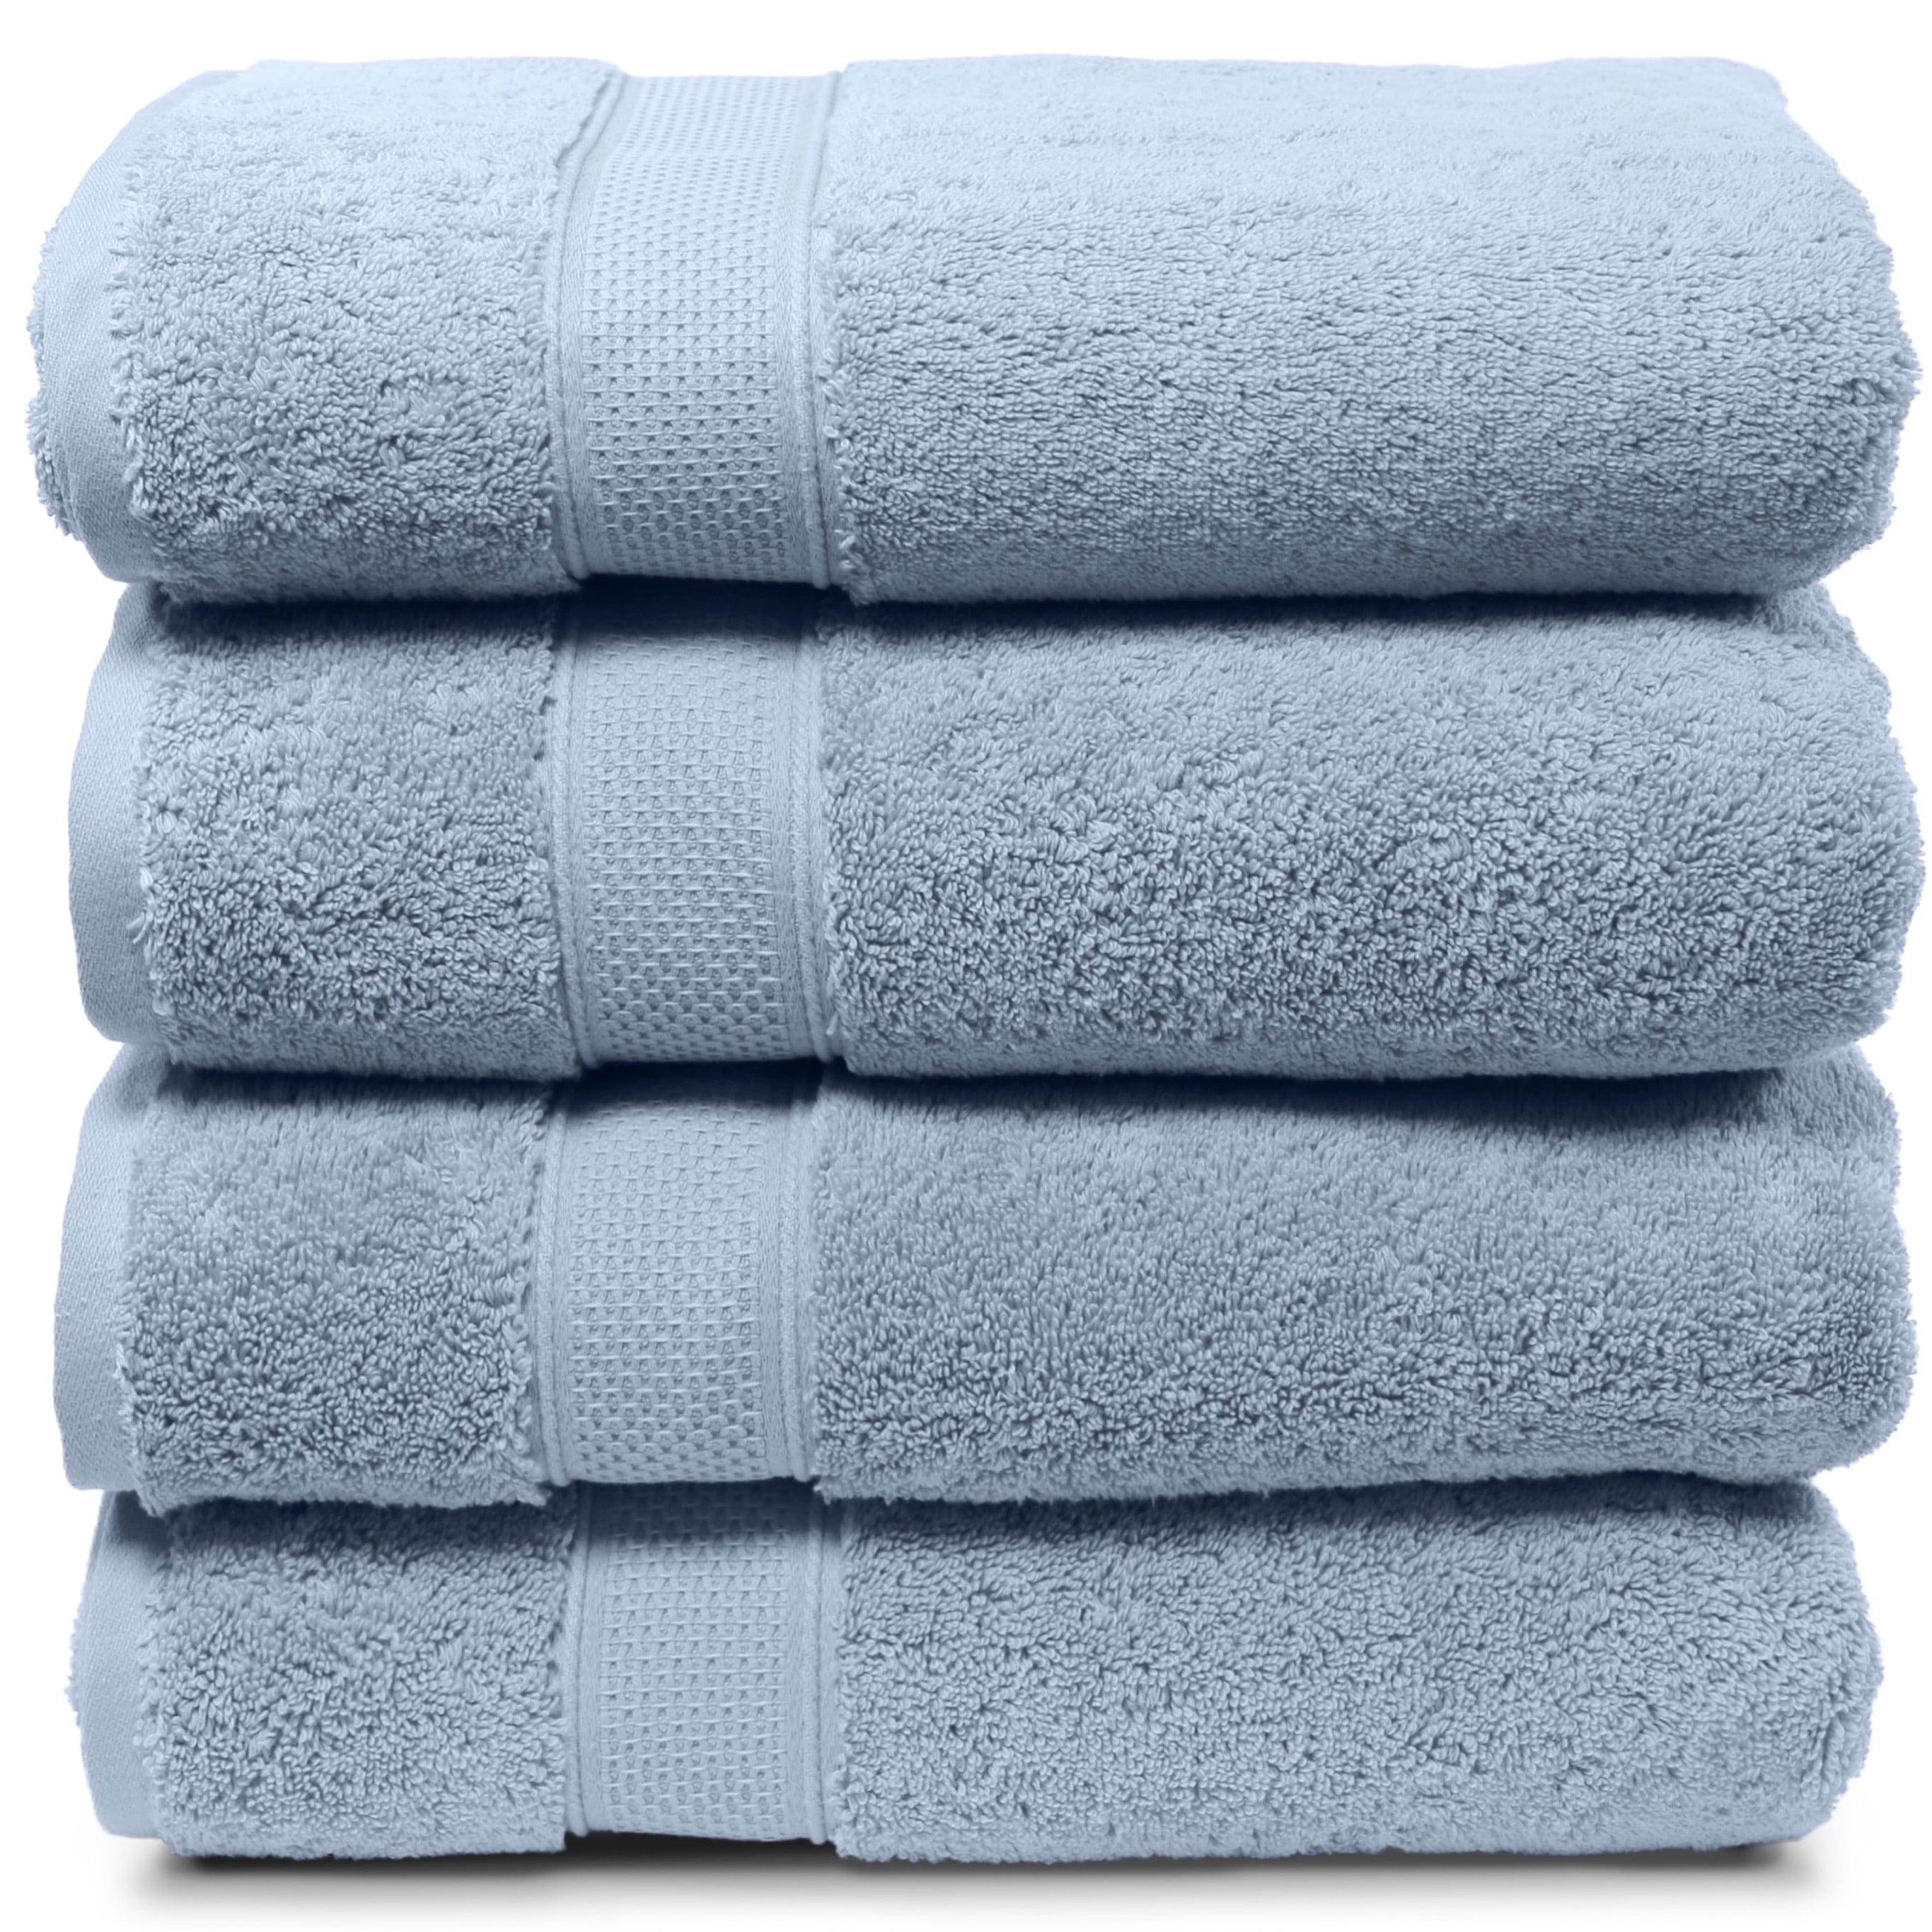 Maura Indulge in Comfort: 8-Piece Turkish Cotton Towel Set - Soft, Plush,  and Highly Absorbent - Elevate Your Bath to Hotel & Spa Quality - Oversized